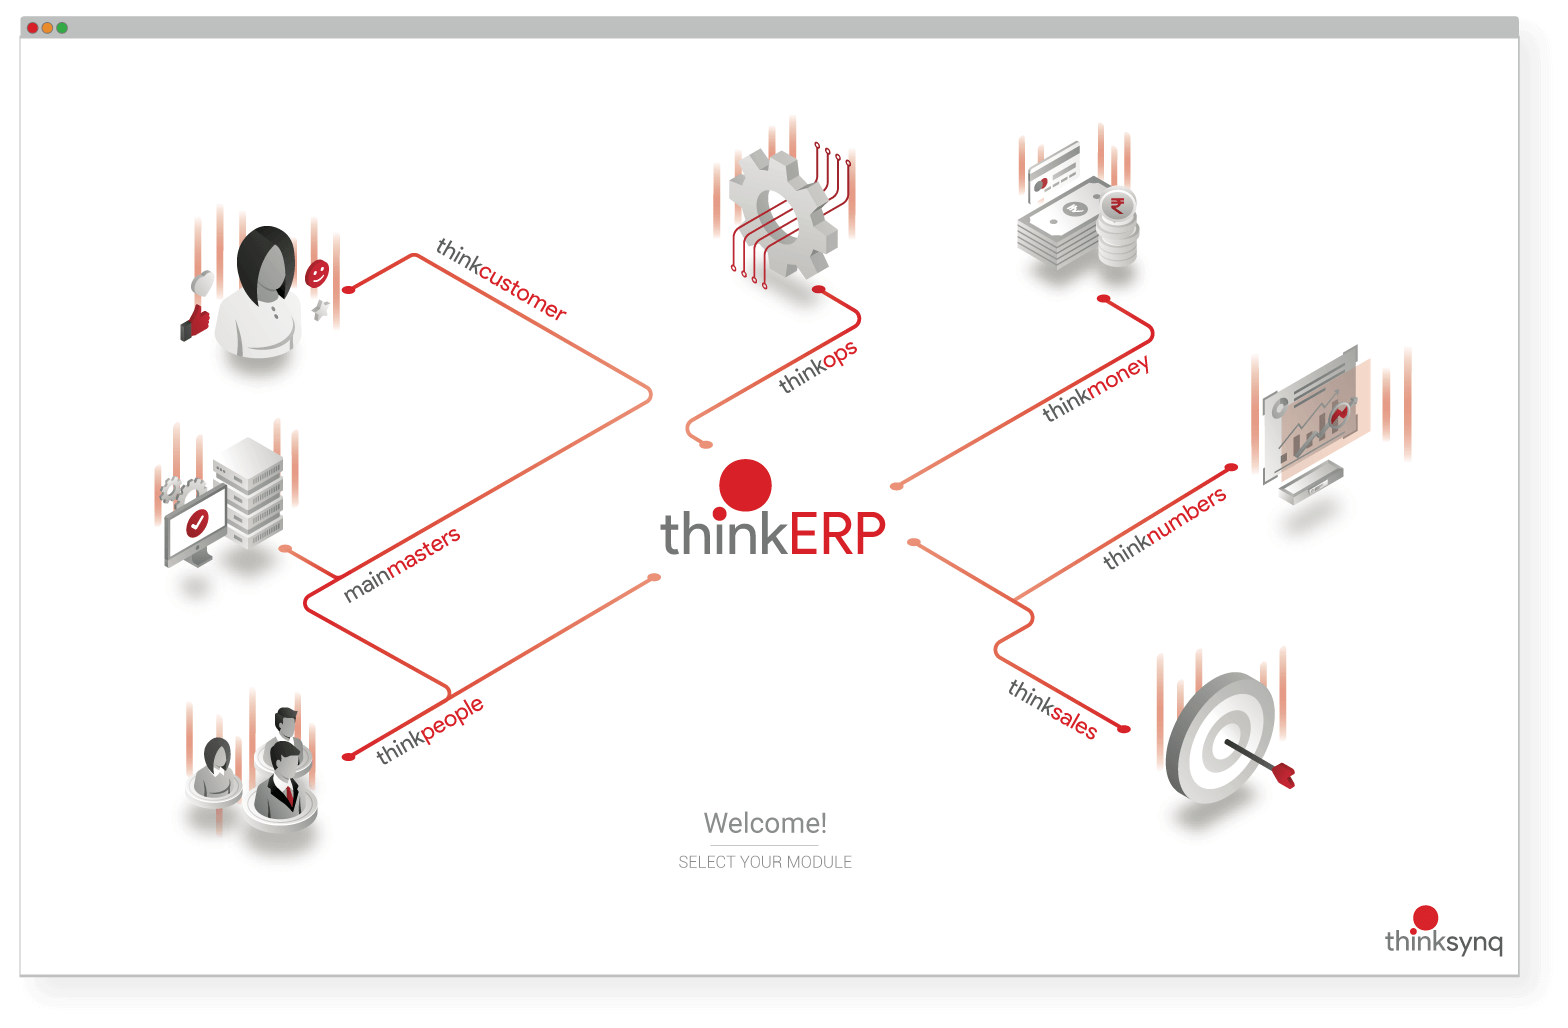 Flow chart showing the process of thinkERP by thinksynq solutions